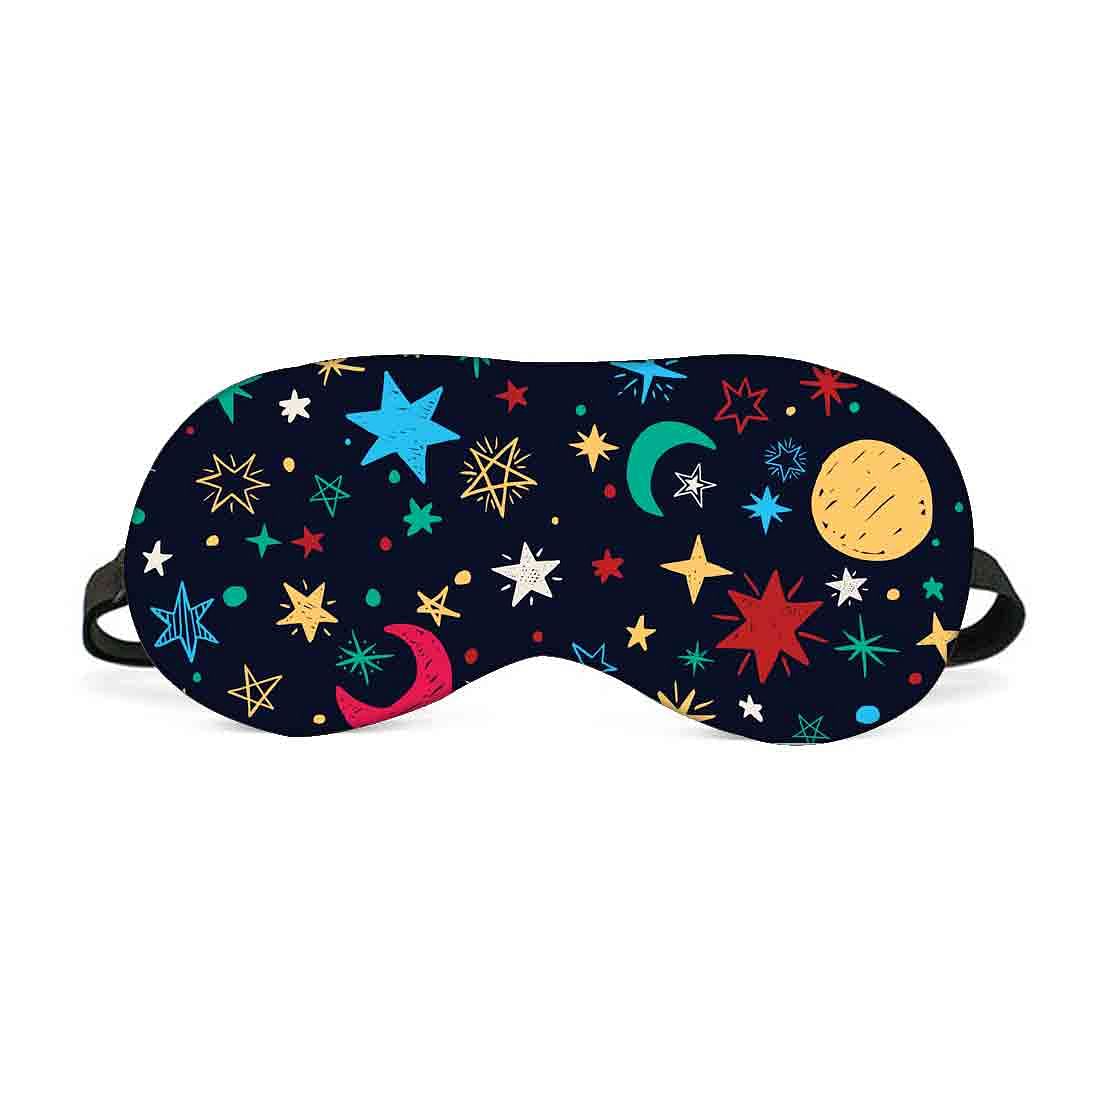 Designer Travel Eye Mask for Sleeping - Moon and Stars - Made in India Nutcase